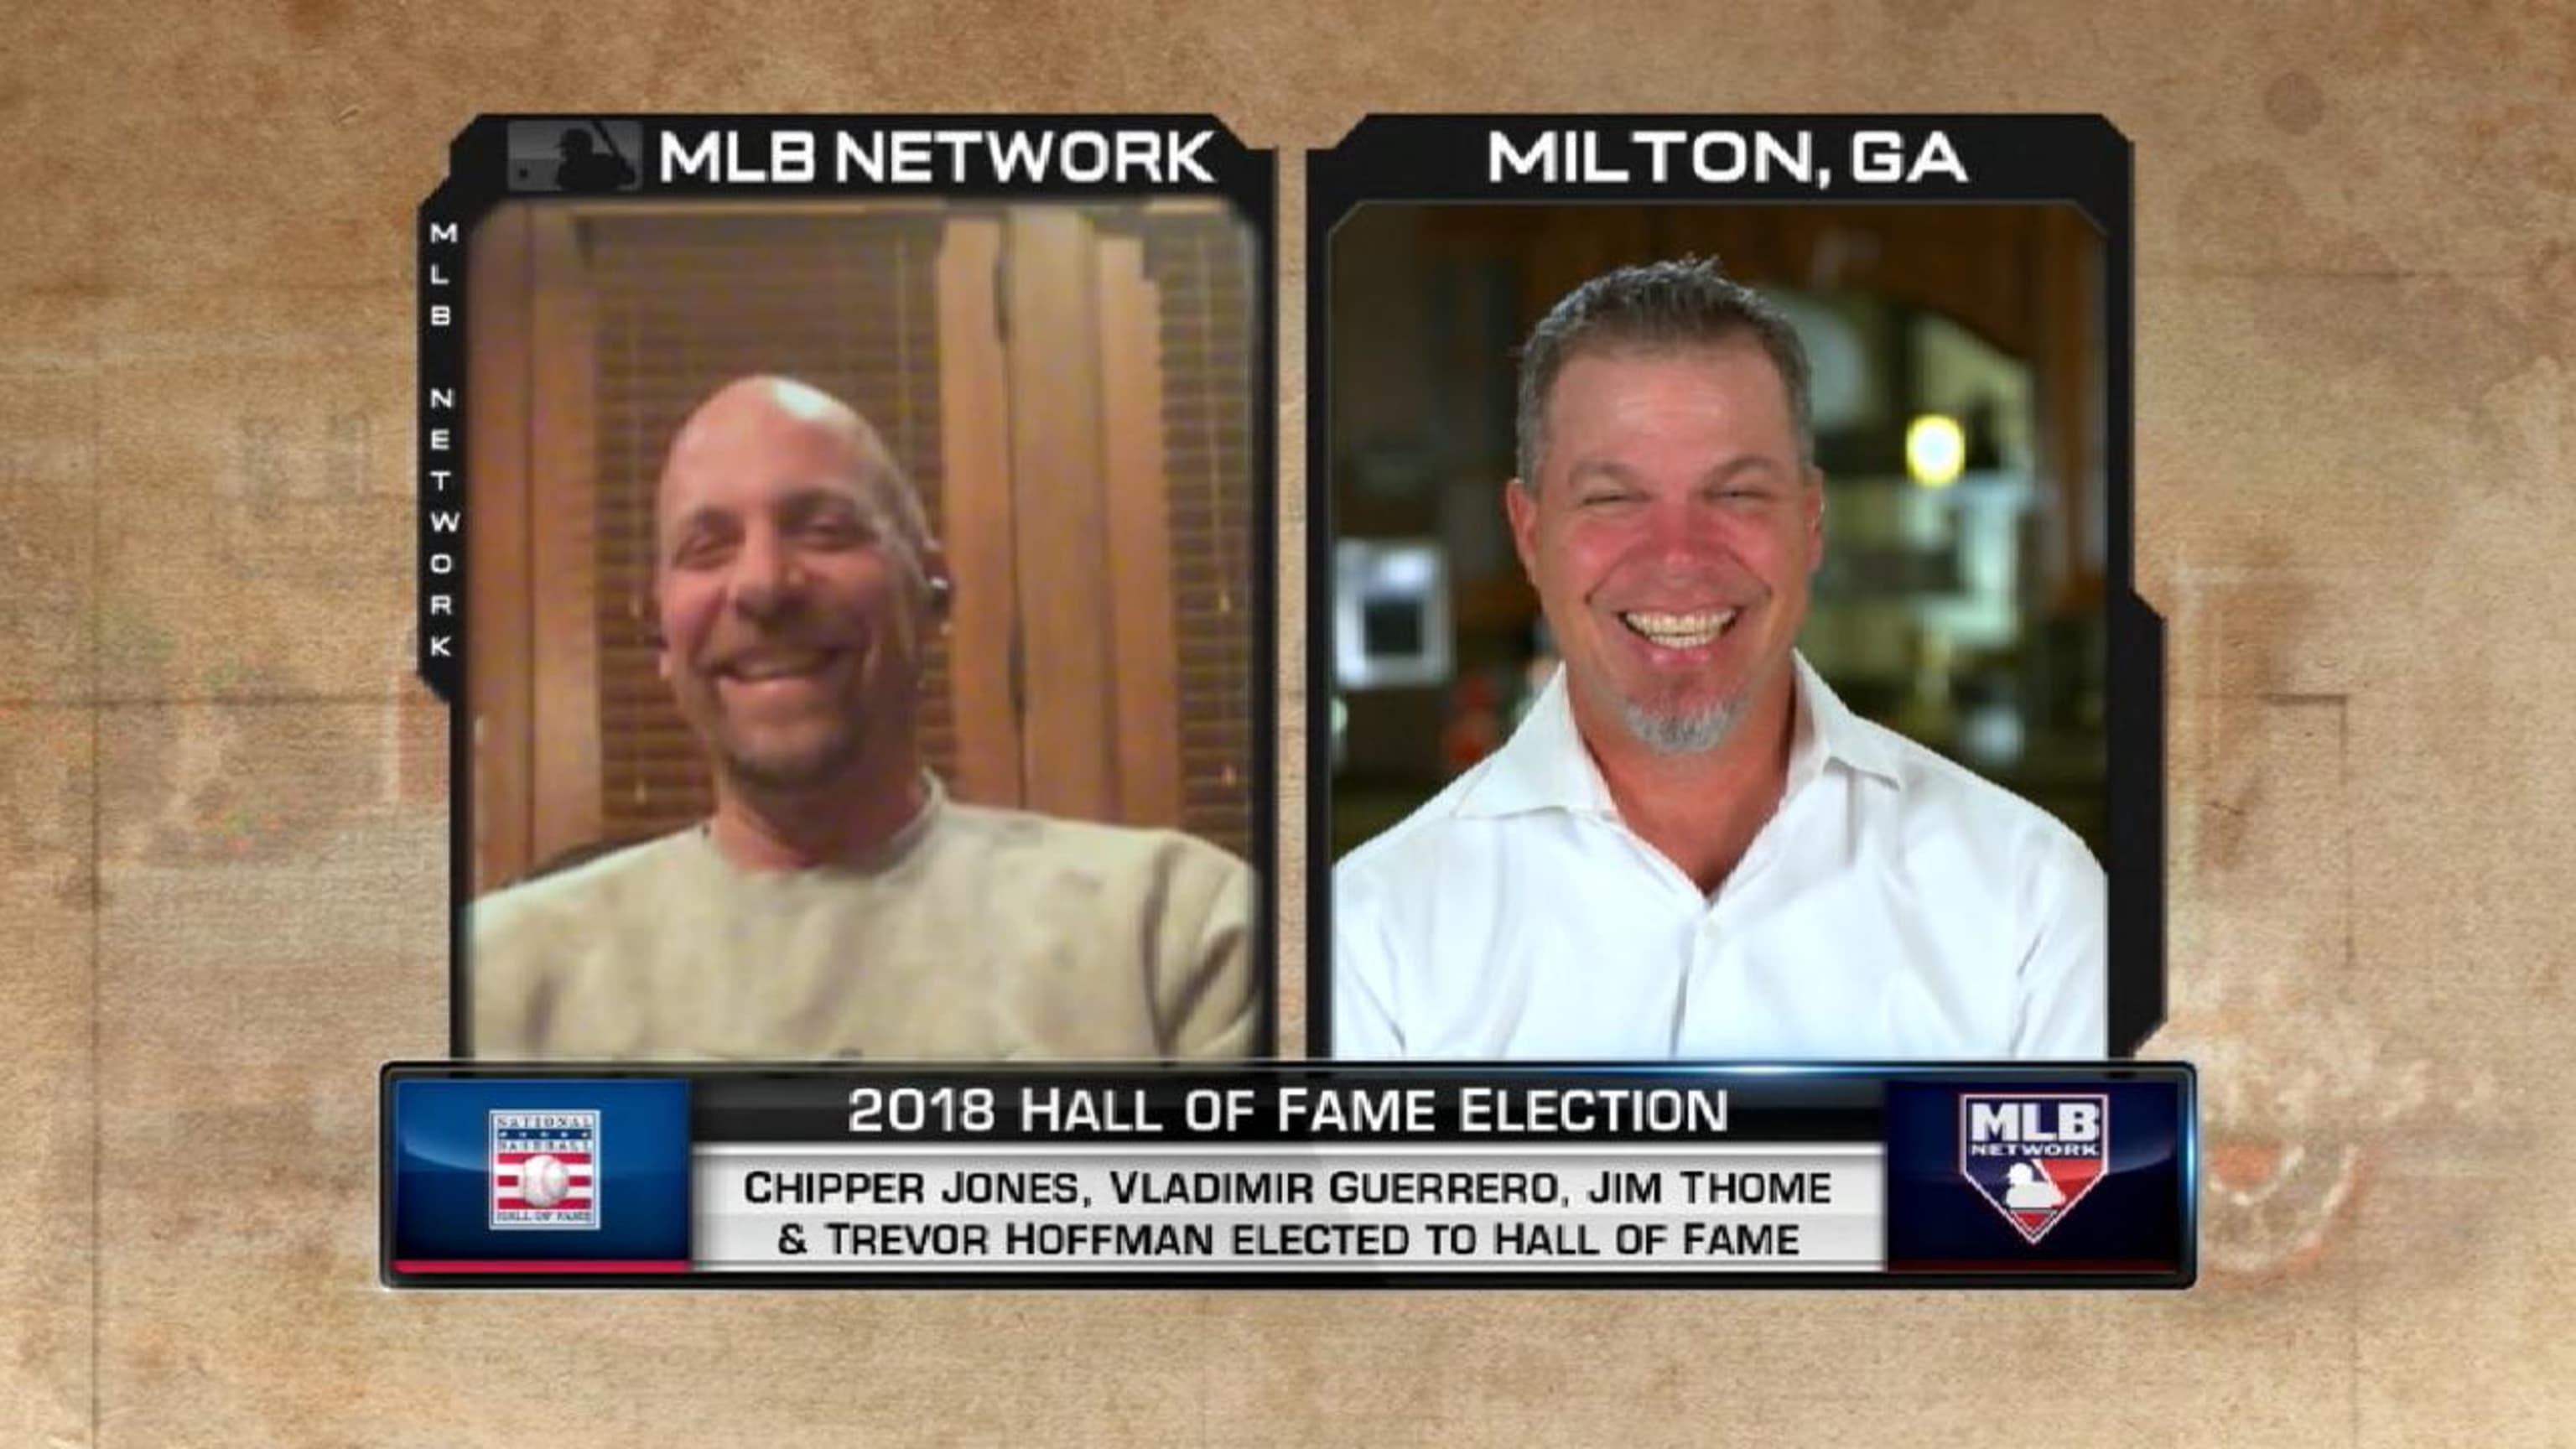 Volusia native Chipper Jones elected to first-ballot Hall of Famer